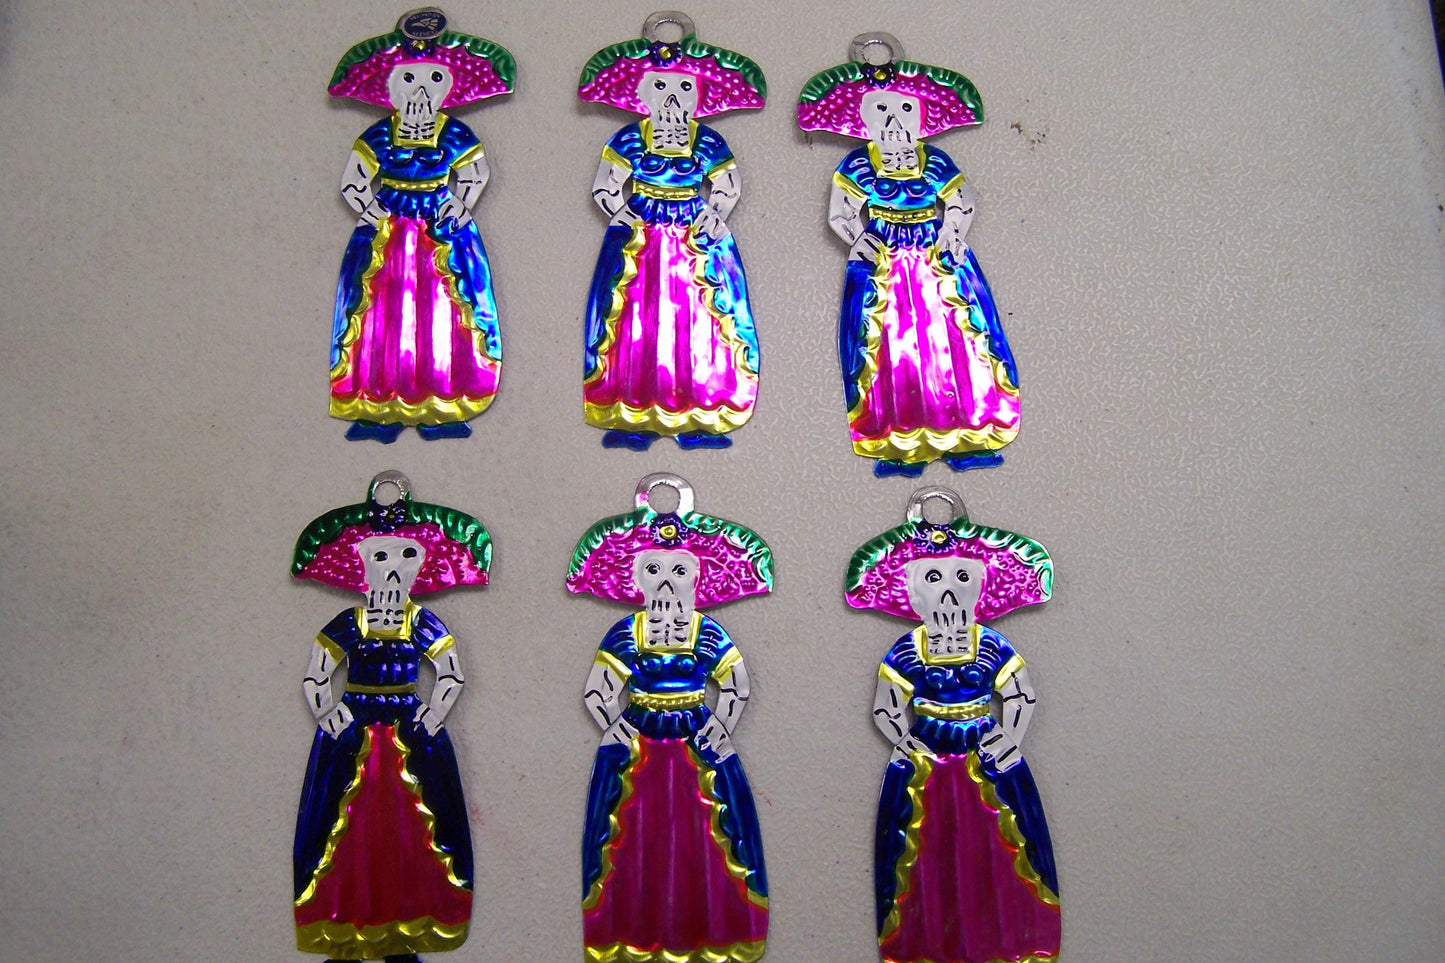 Lot of 6 Tin Painted Day of the Dead Ornaments - Catrina, Fancy Skeleton Lady - Mexico